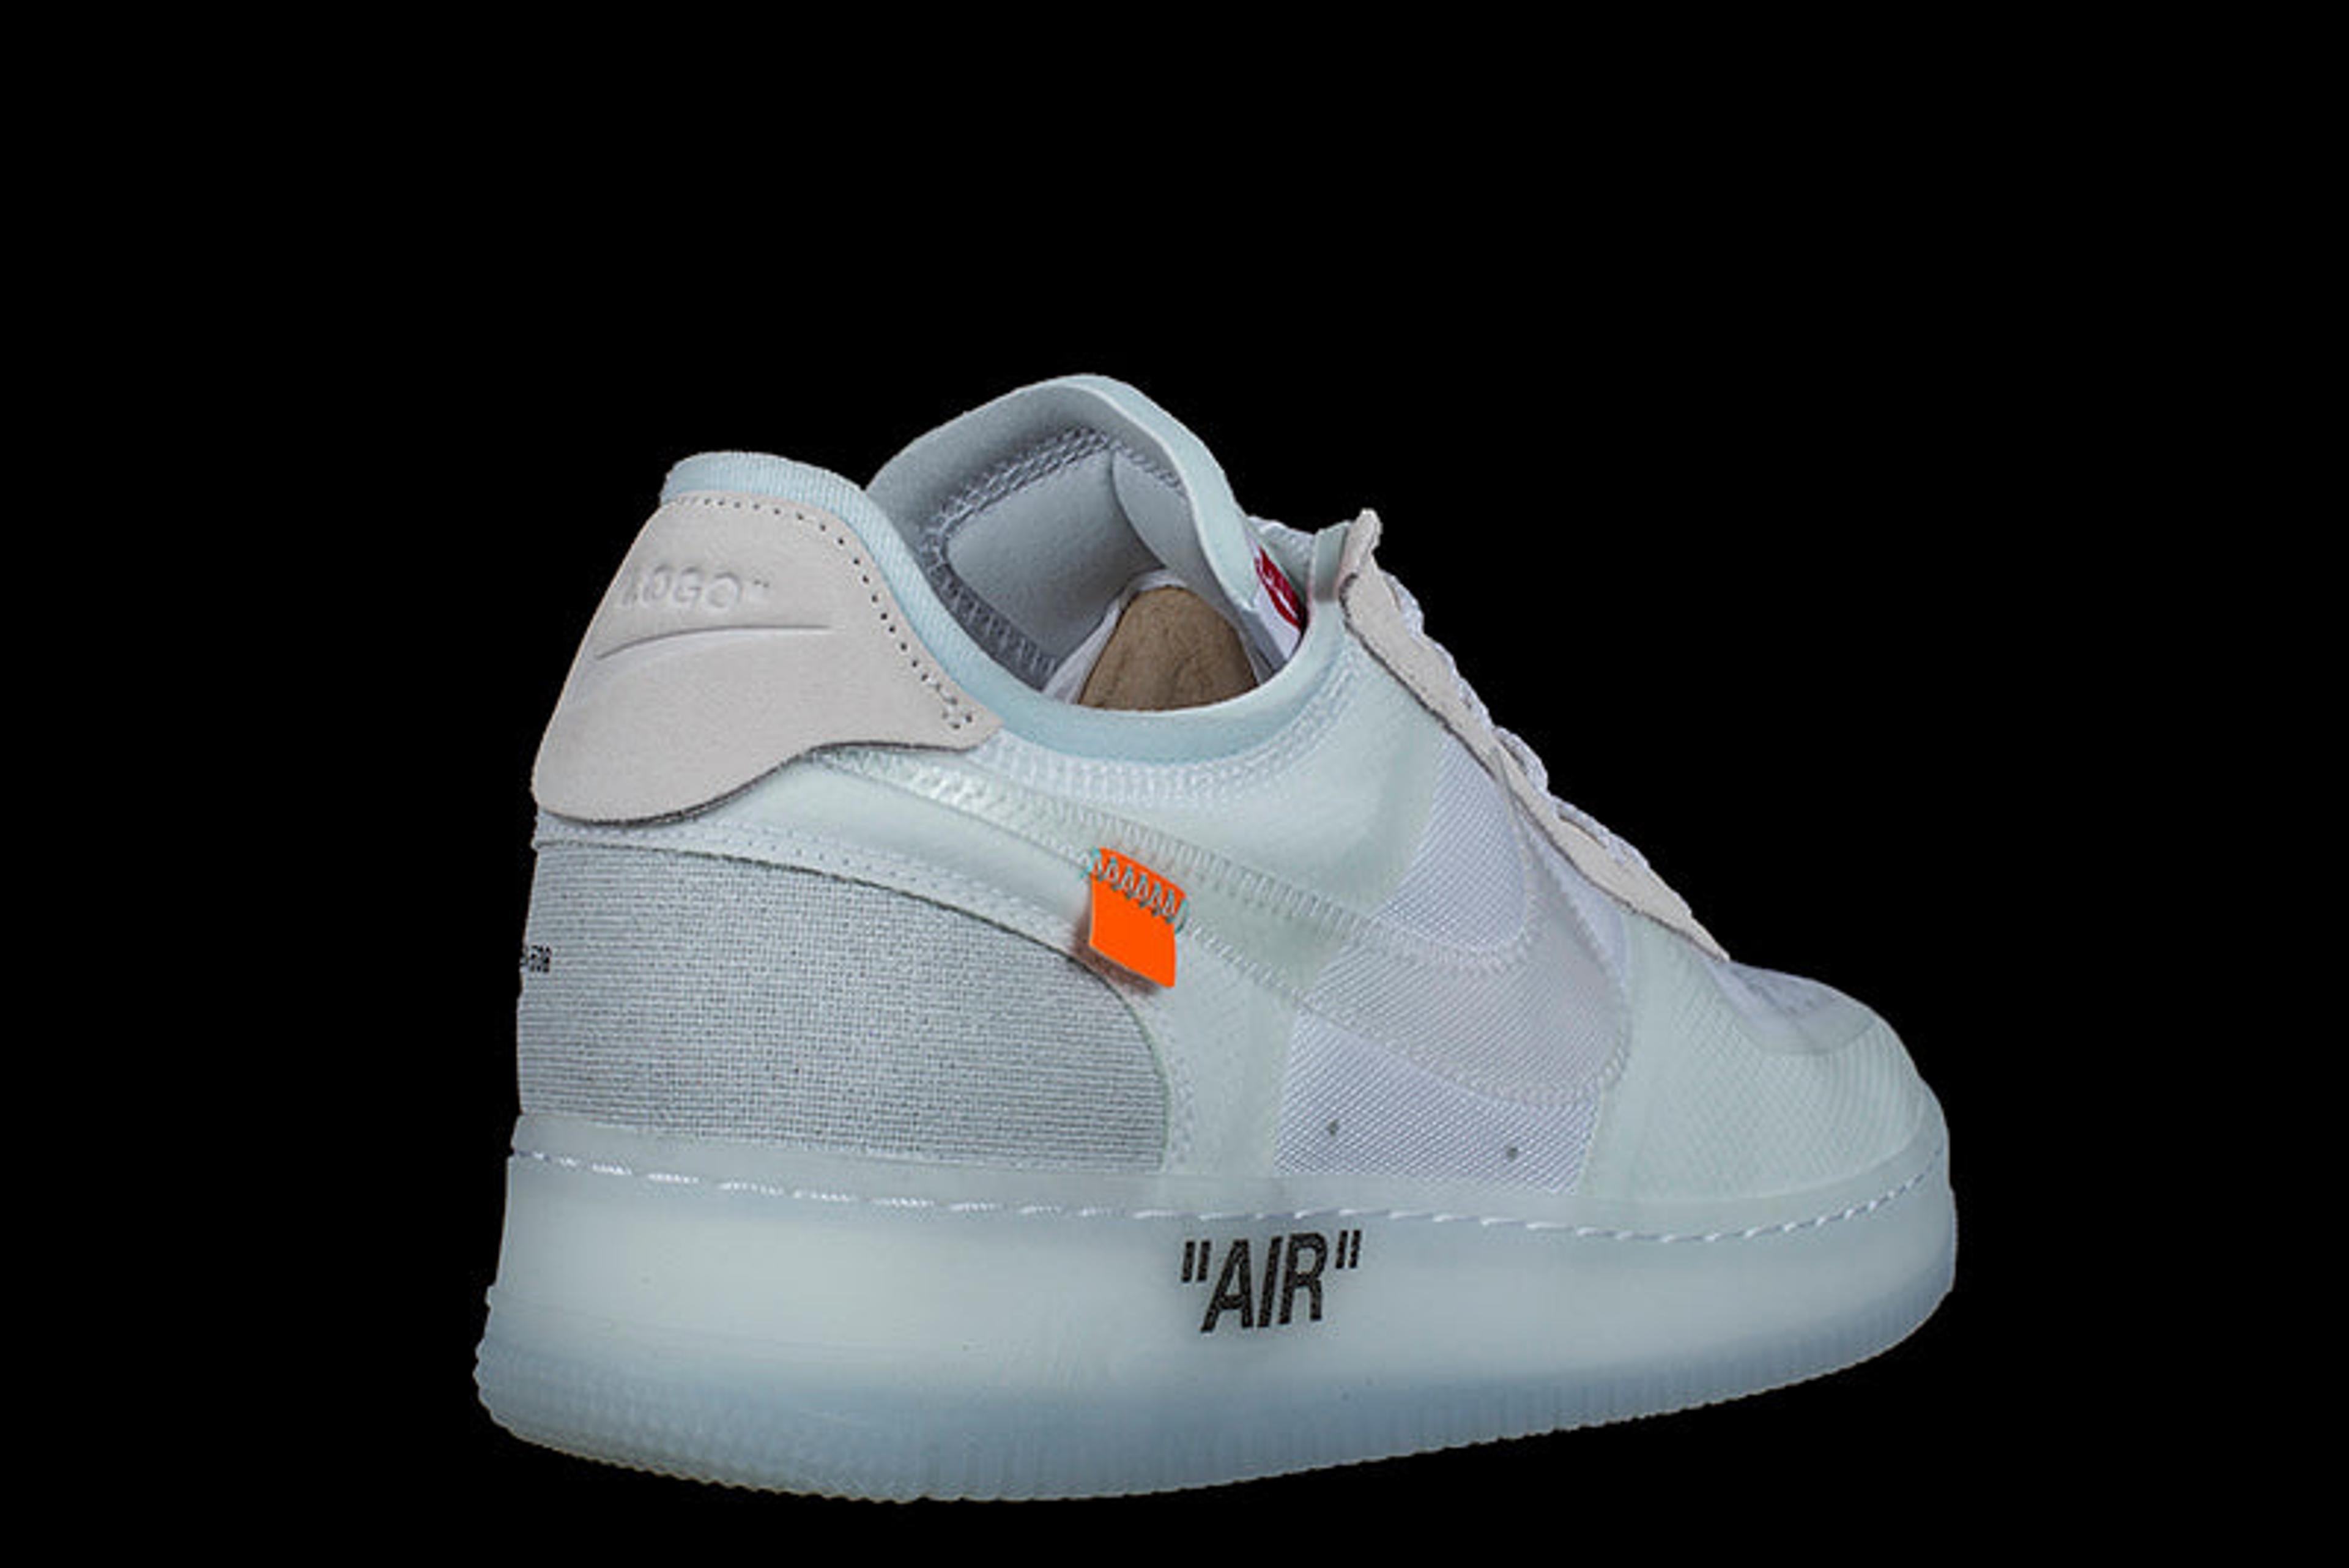 Off White x Nike Air Force 1 Low The Ten AO4606-100